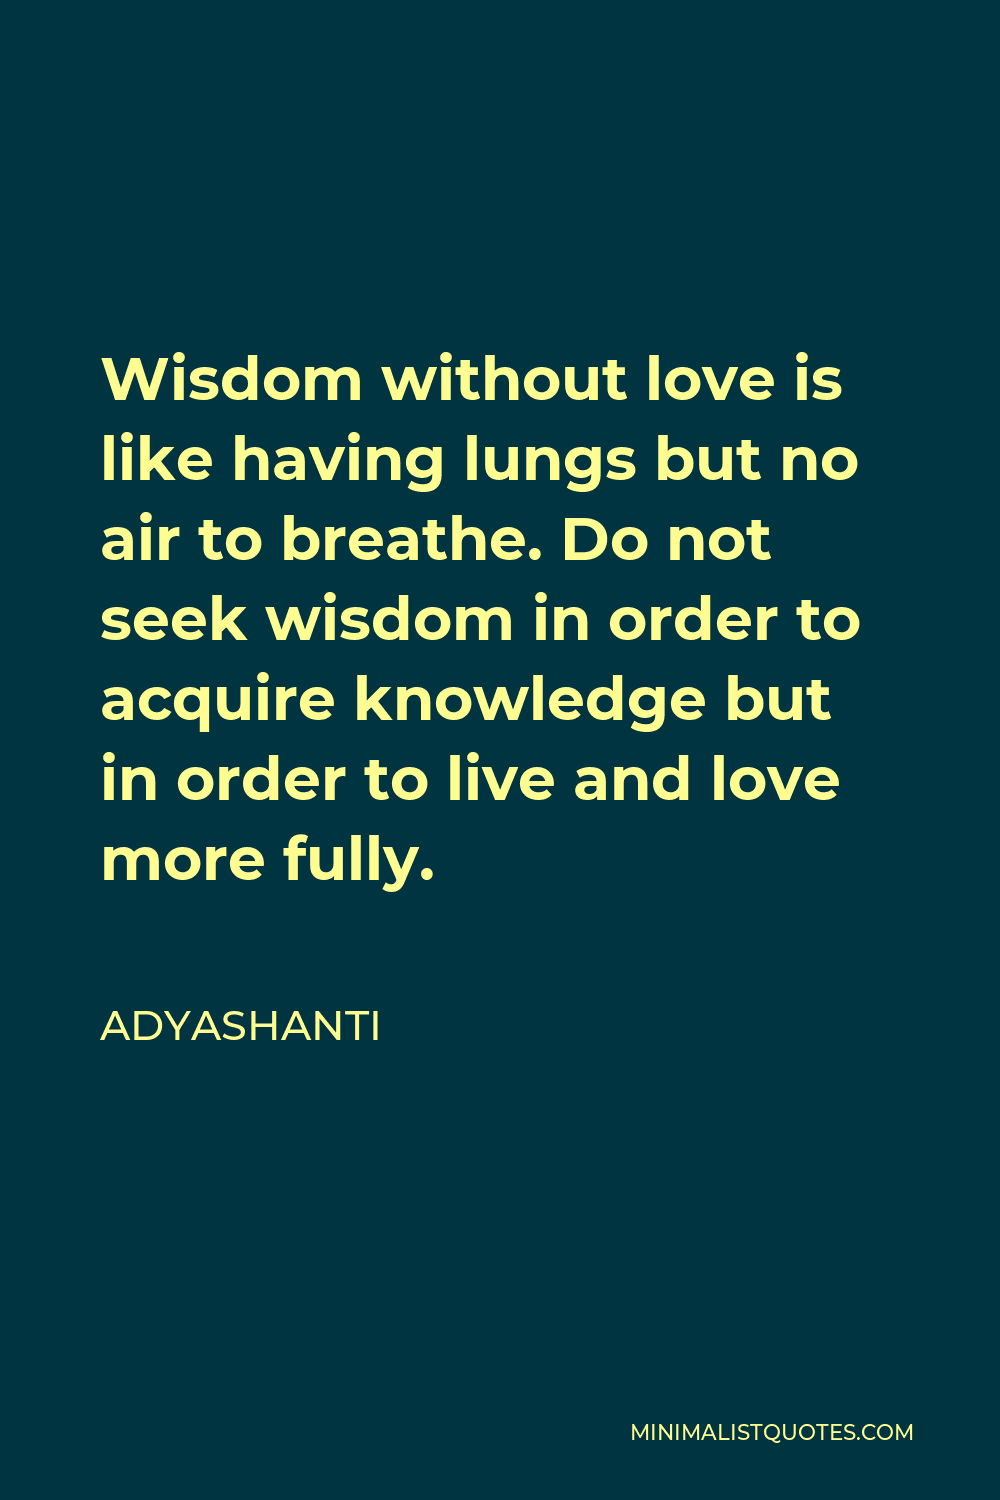 Adyashanti Quote - Wisdom without love is like having lungs but no air to breathe. Do not seek wisdom in order to acquire knowledge but in order to live and love more fully.